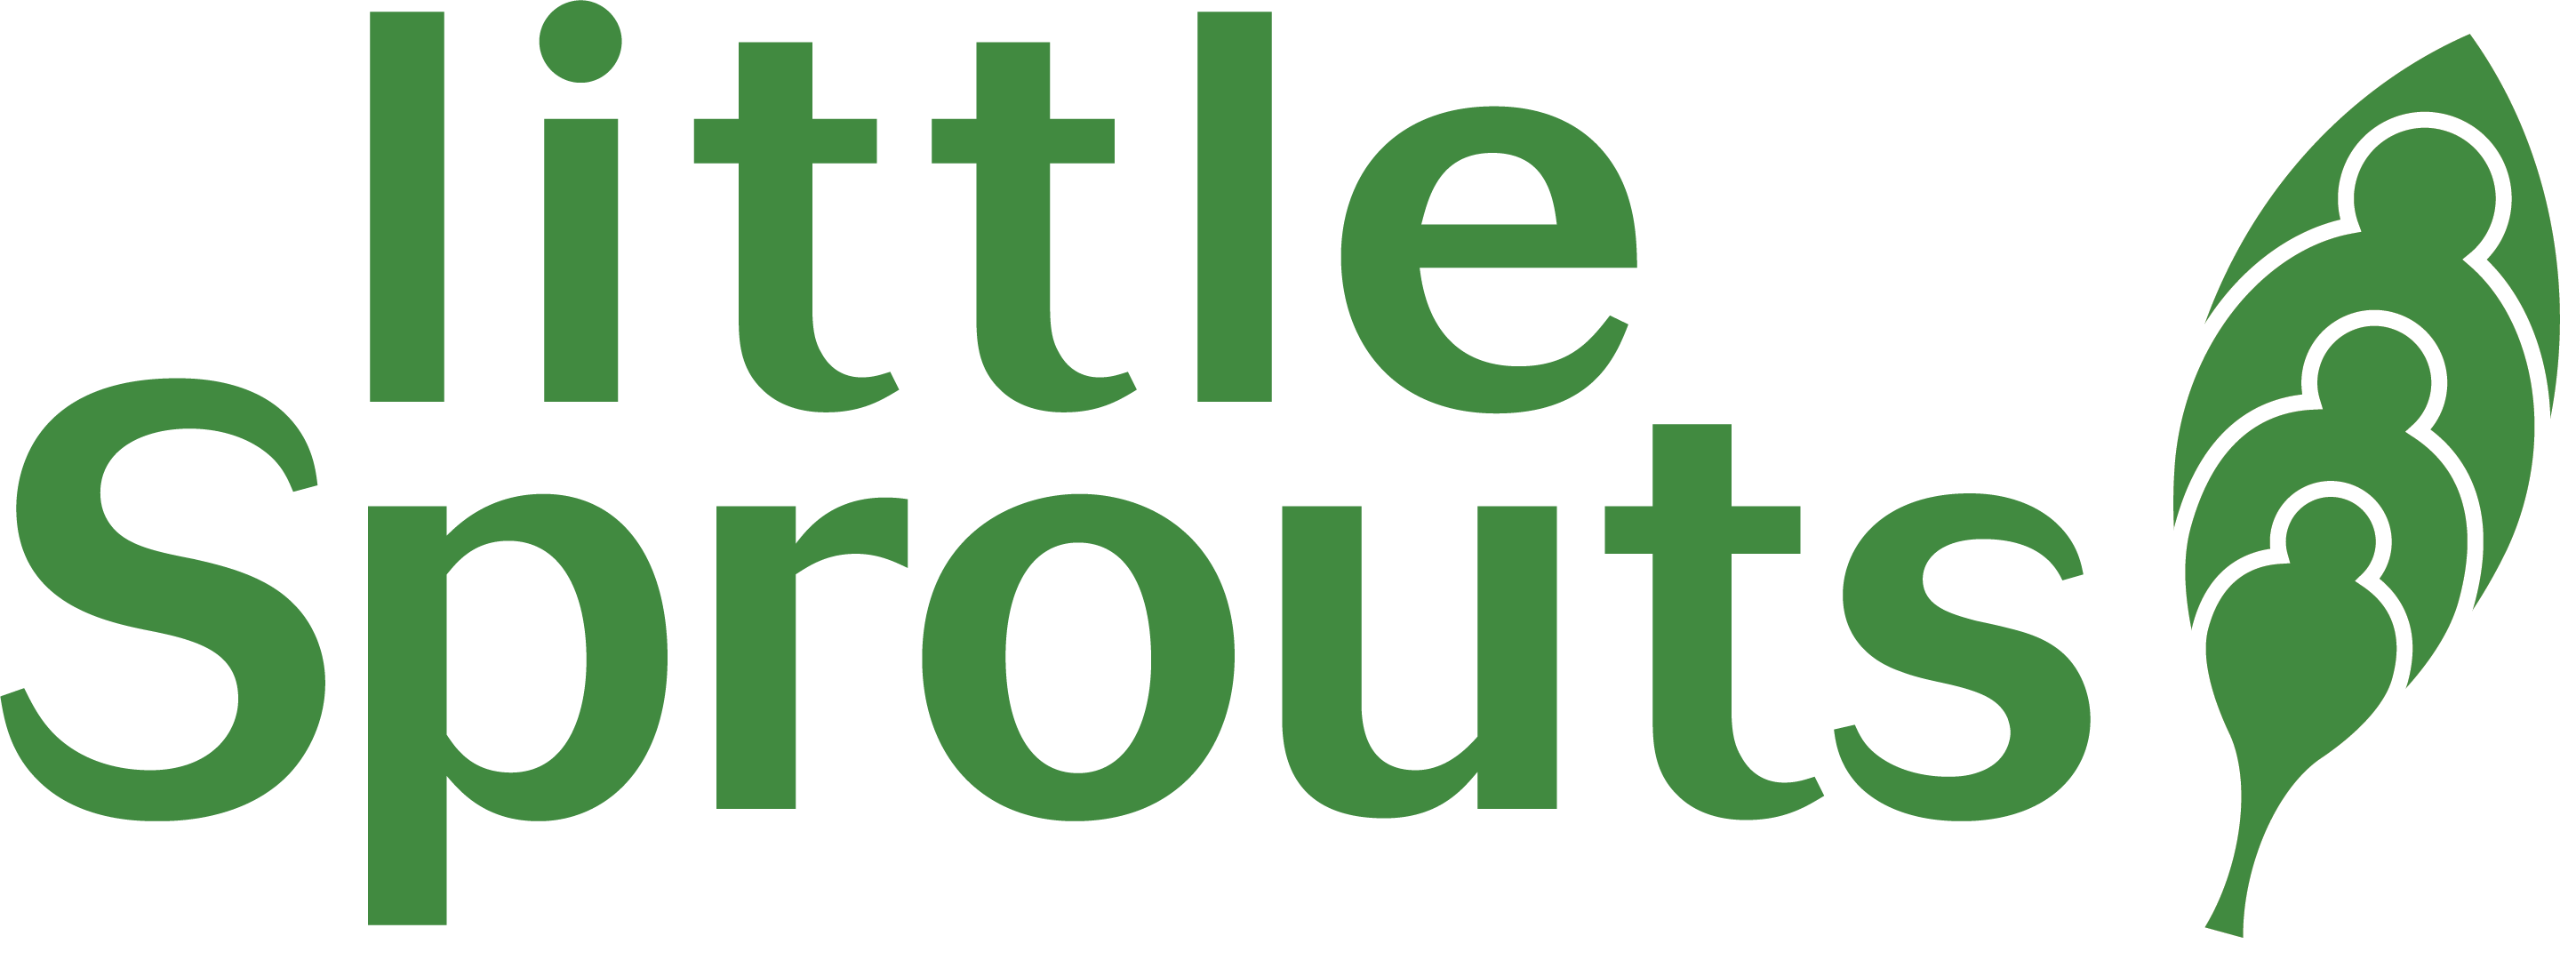 Little Sprouts Careers